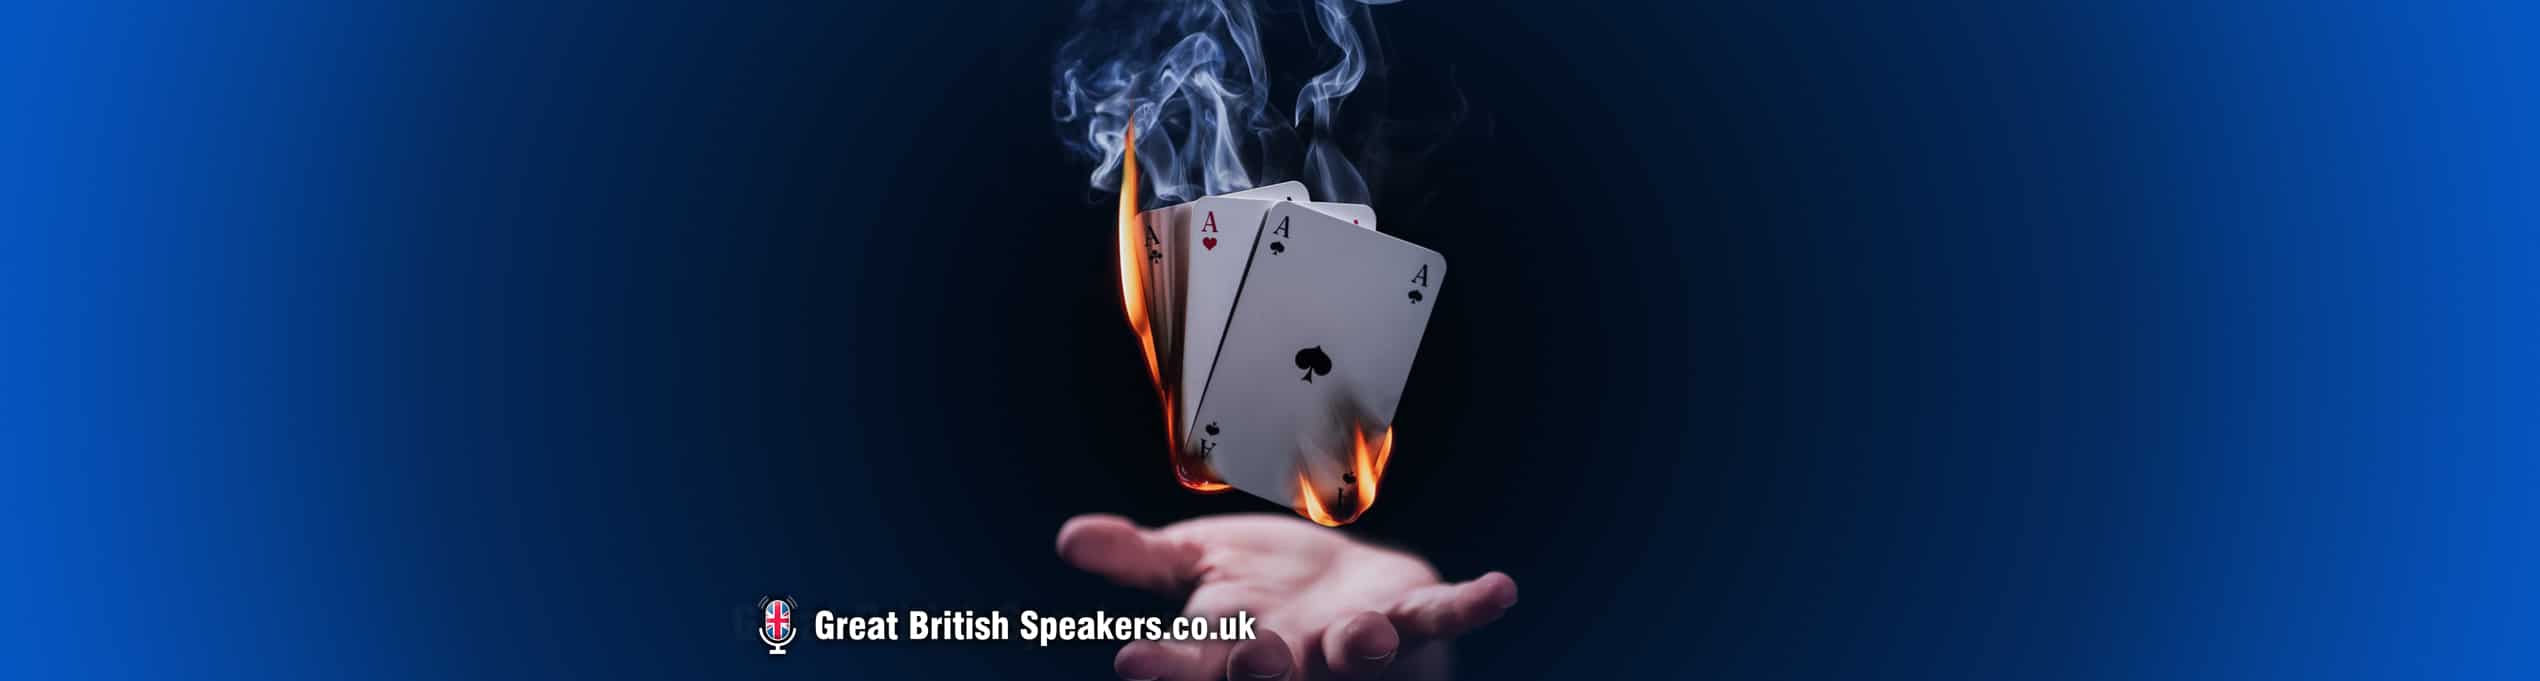 Christopher Howell Magic Circle Magician Keynote Speaker Creative thinking book at Great British Speakers